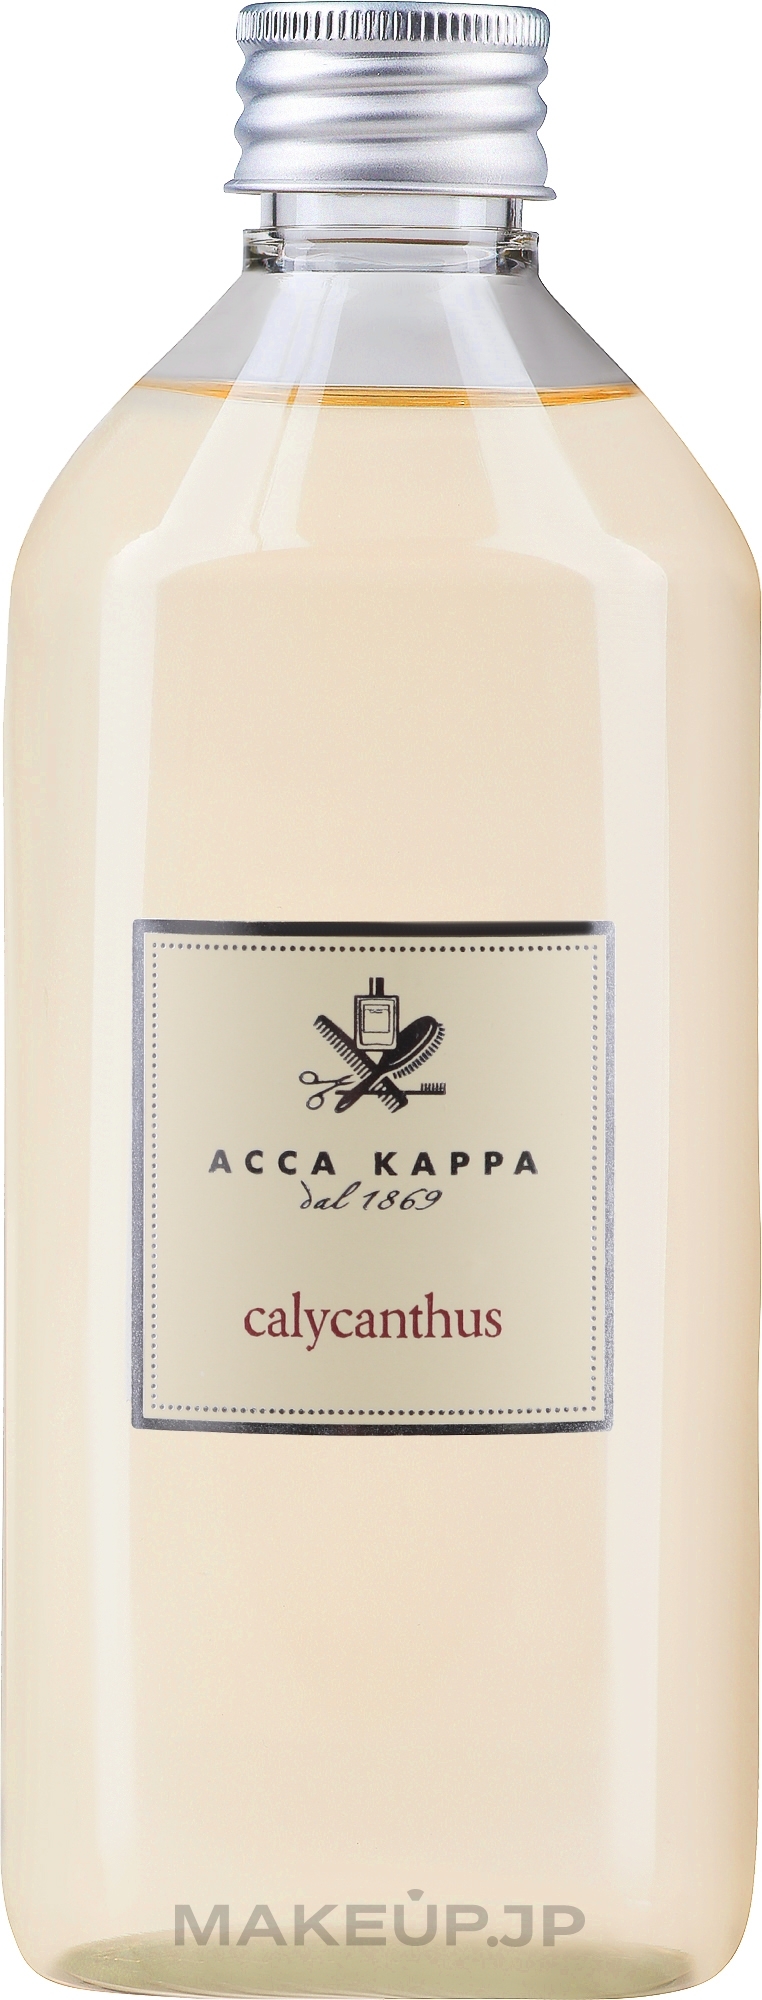 Home Fragrance Diffuser - Acca Kappa Calycanthus Home Fragrance Diffuser (refill) — photo 500 ml